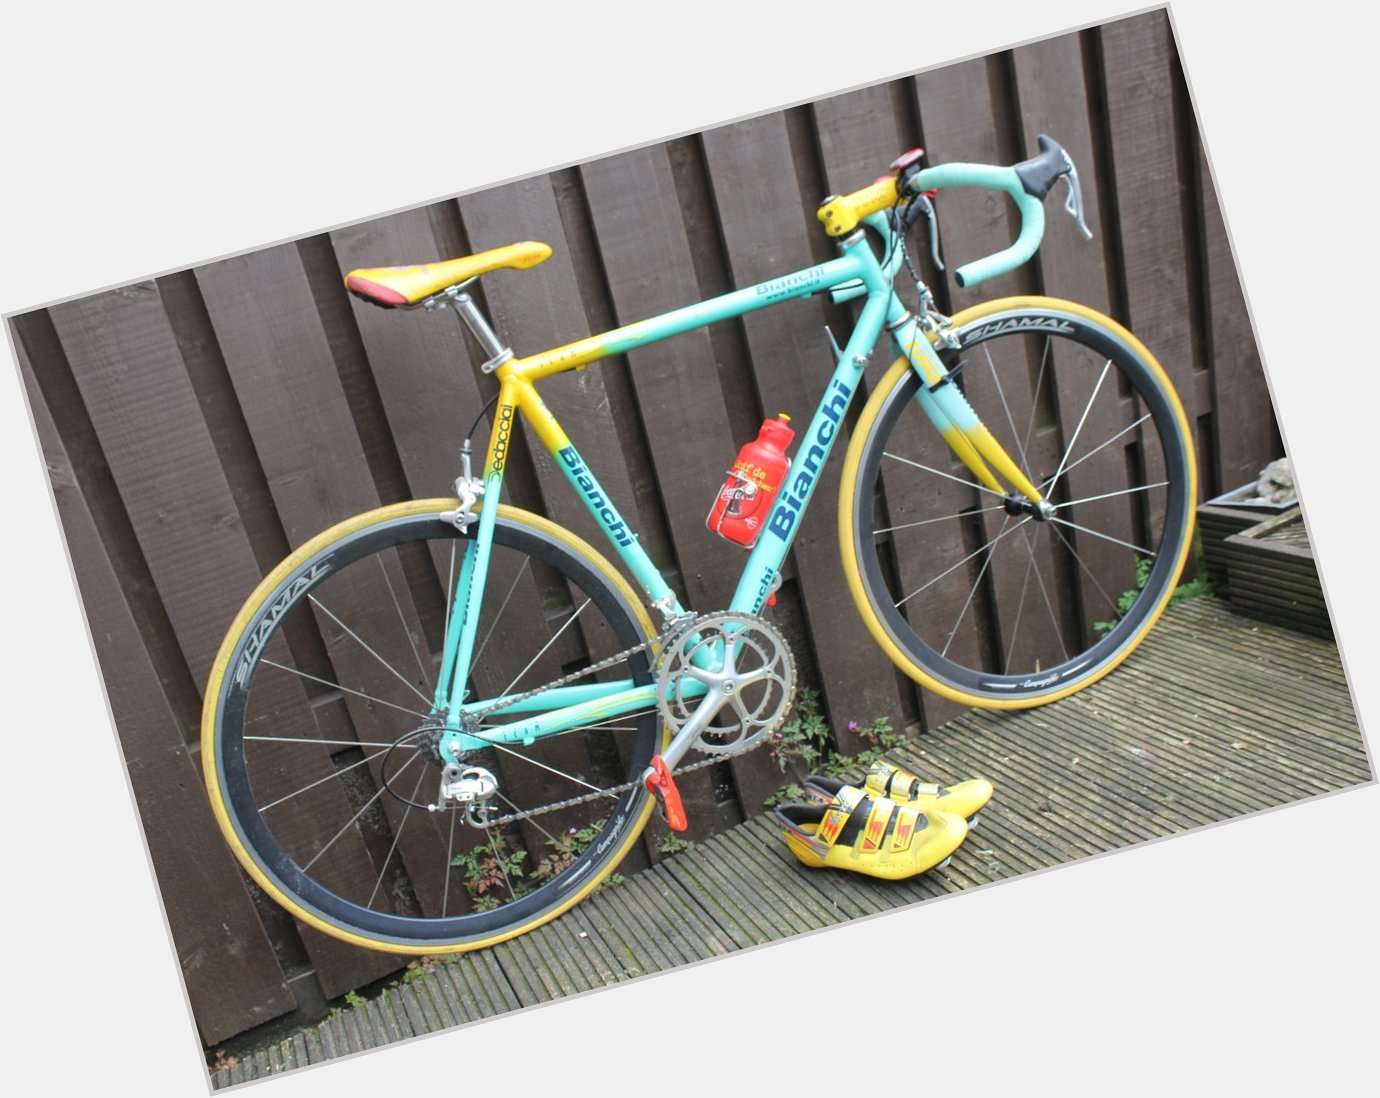 Happy Birthday Marco Pantani.

Time for the annual pictures of my little tribute bike. 